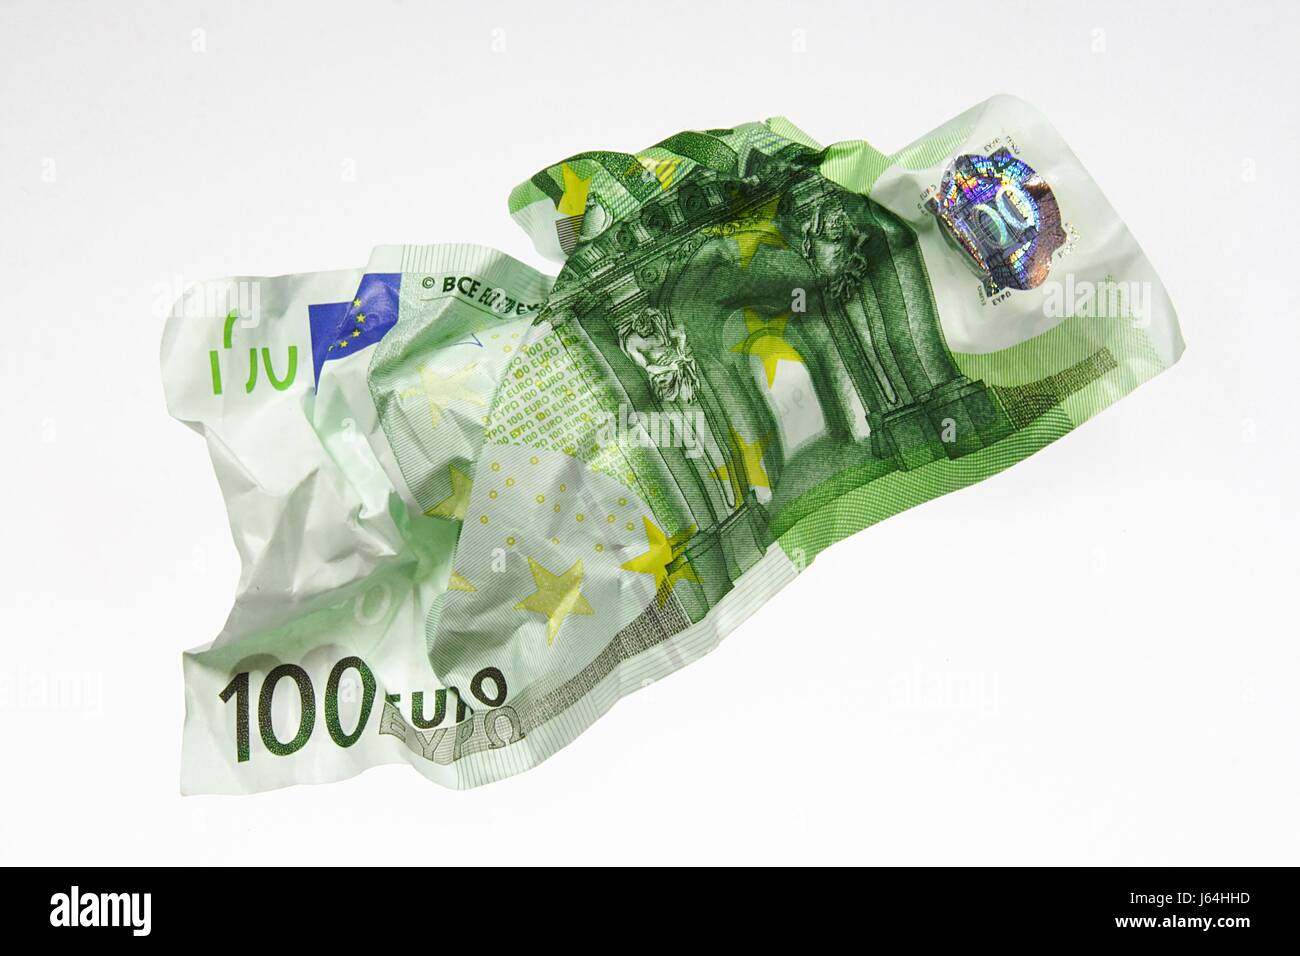 euro bank note treasury notes bills cash cold cash money in cash money currency Stock Photo